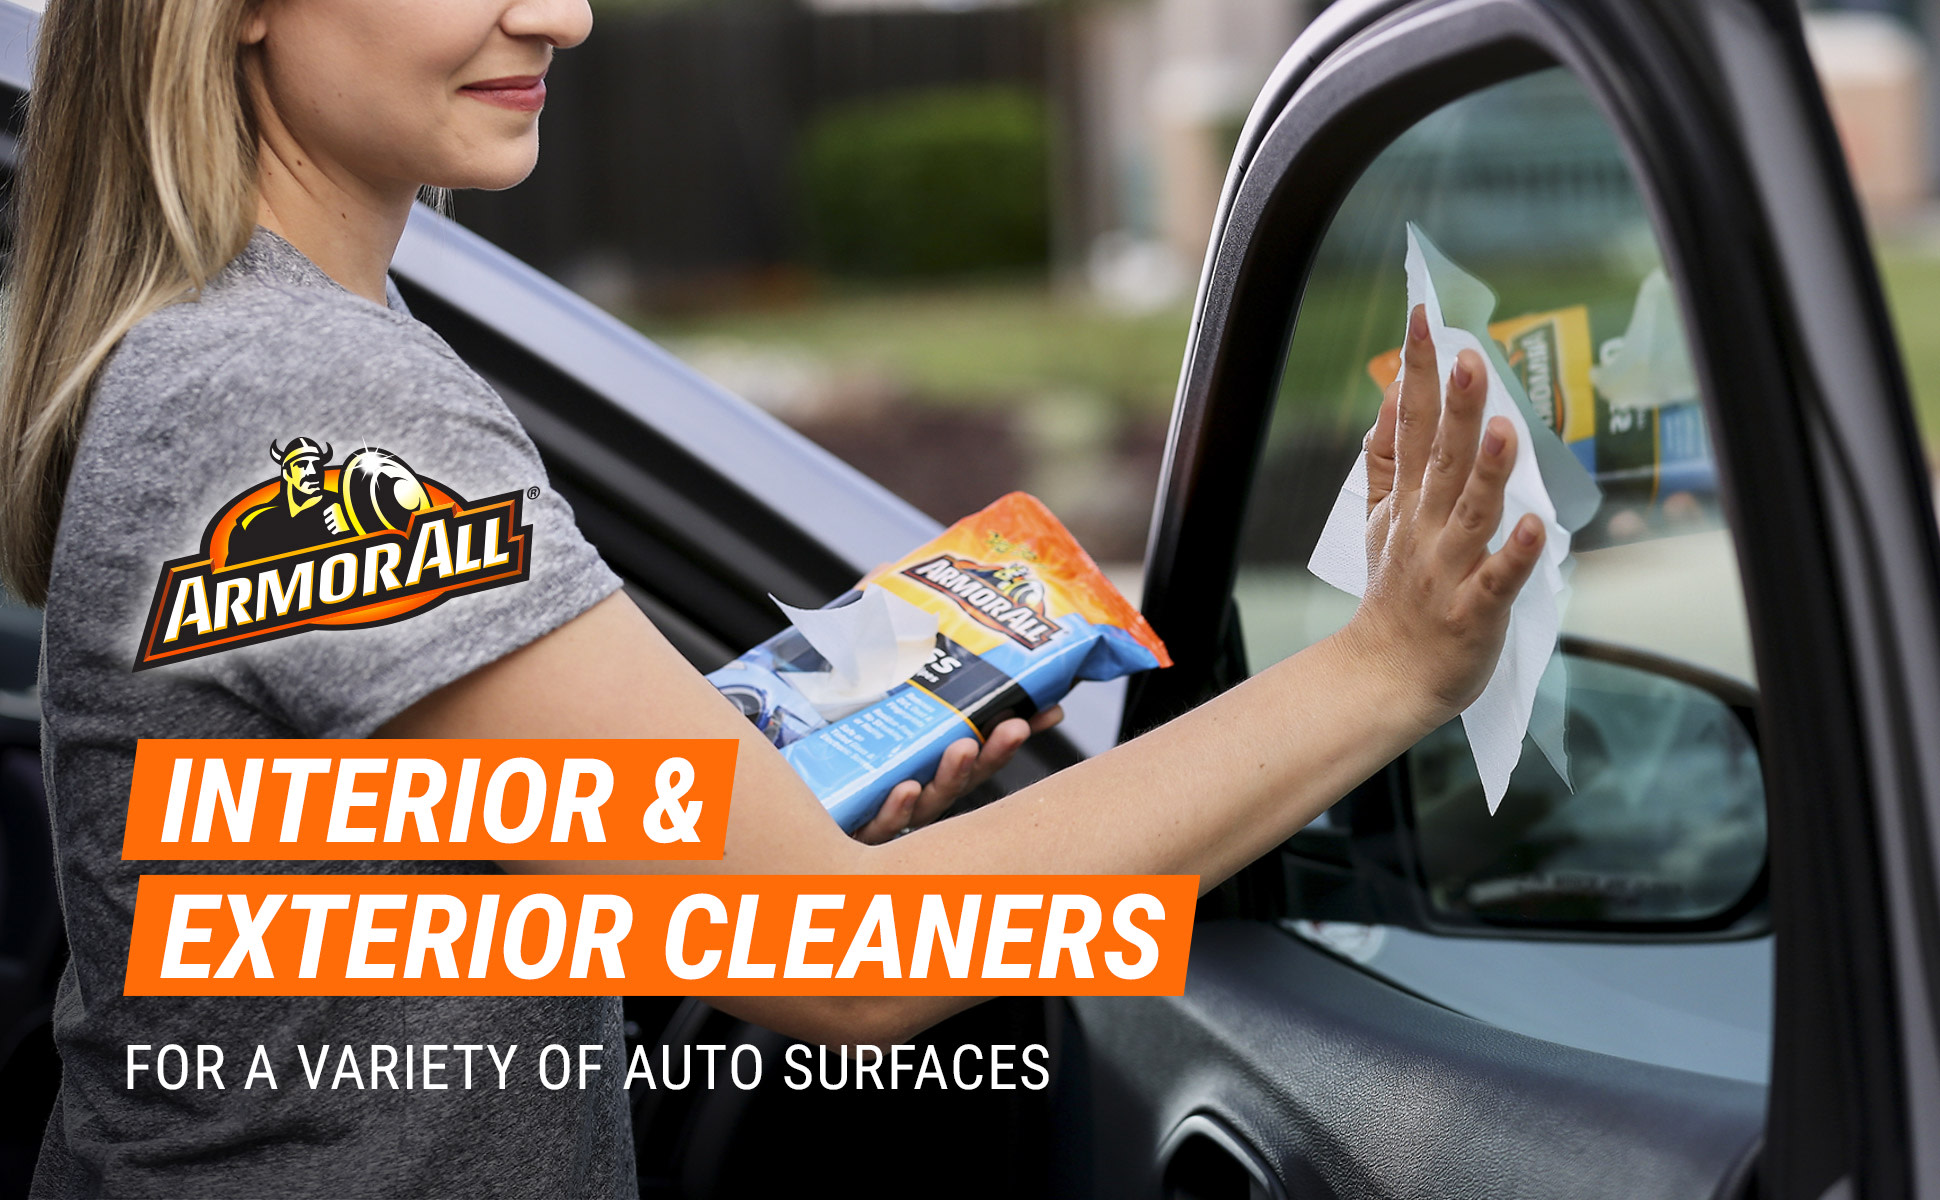 Armor All Car Care Cleaning and Wash Kit (10 Pieces) 